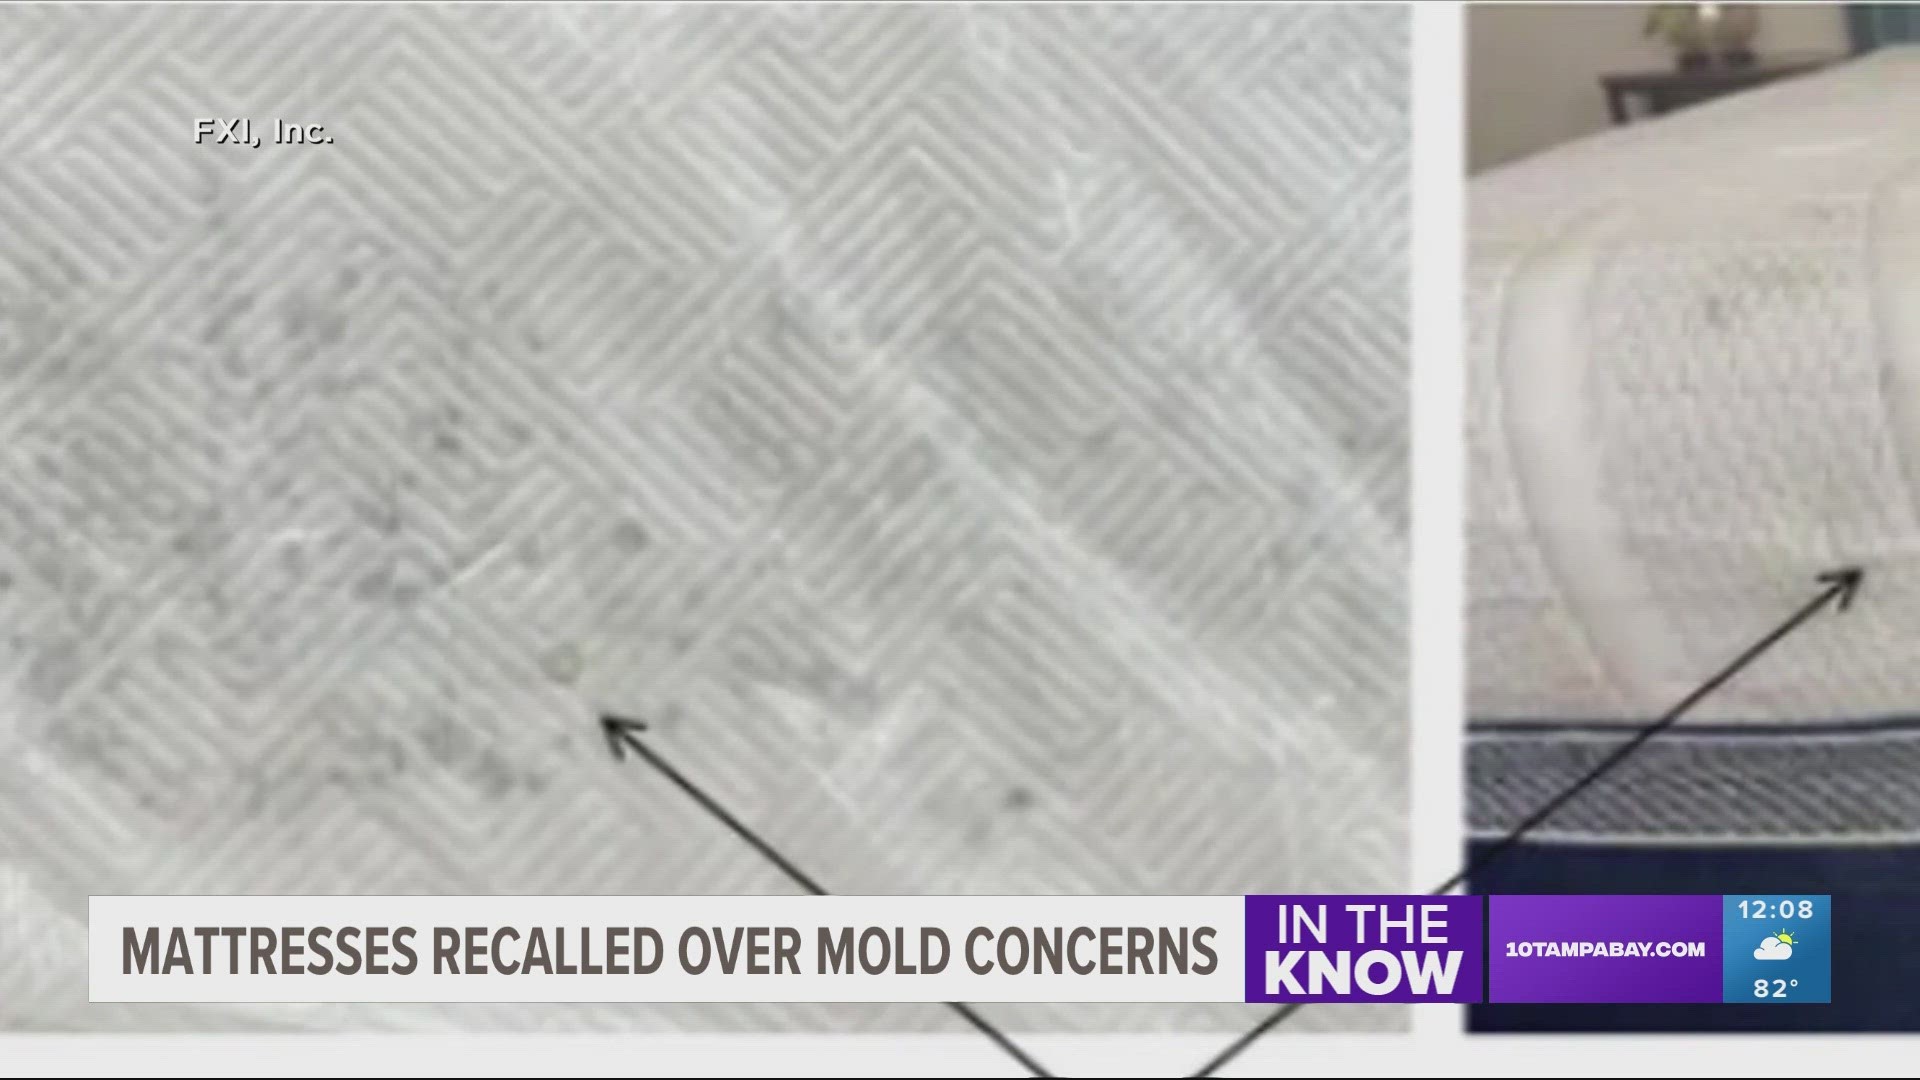 The company has so far received more than 500 reports of mold growing on the mattresses sold by Costco.